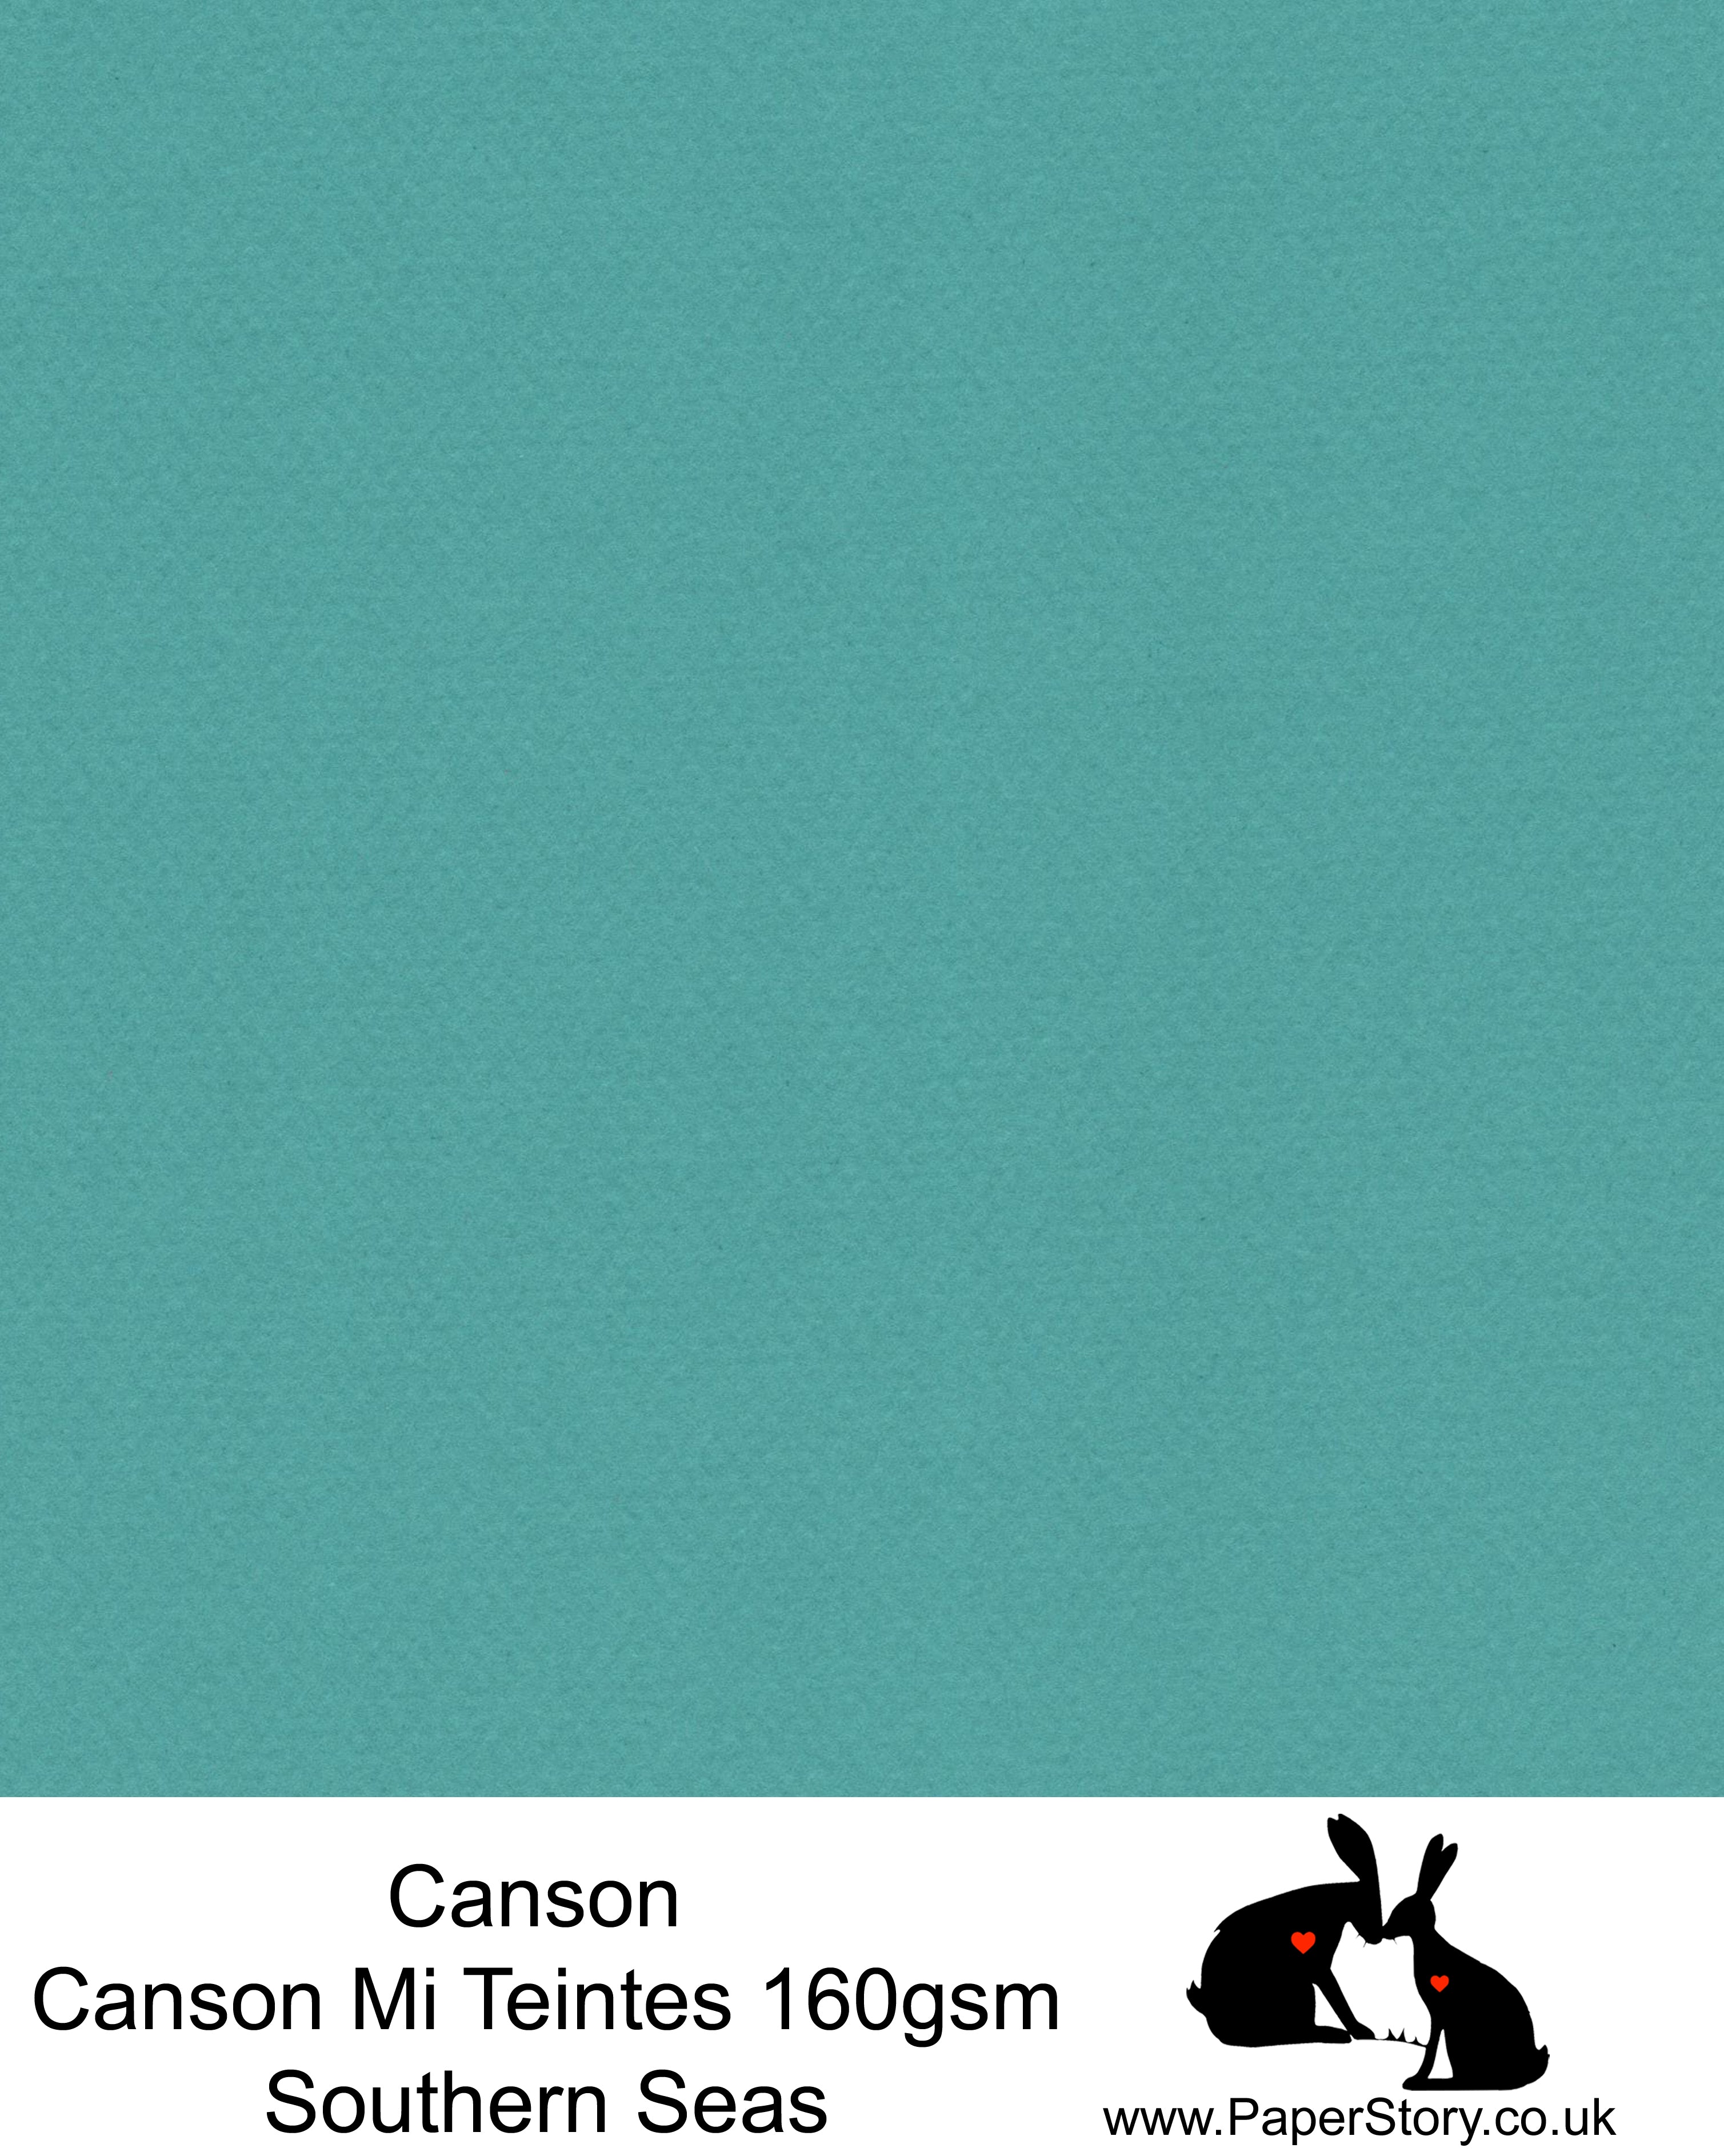 Canson Mi Teintes acid free, Southern seas turquoise, hammered texture honeycomb surface paper 160 gsm. This is a popular and classic paper for all artists especially well respected for Pastel  and Papercutting made famous by Paper Panda. This paper has a honeycombed finish one side and fine grain the other. An authentic art paper, acid free with a  very high 50% cotton content. Canson Mi-Teintes complies with the ISO 9706 standard on permanence, a guarantee of excellent conservation  